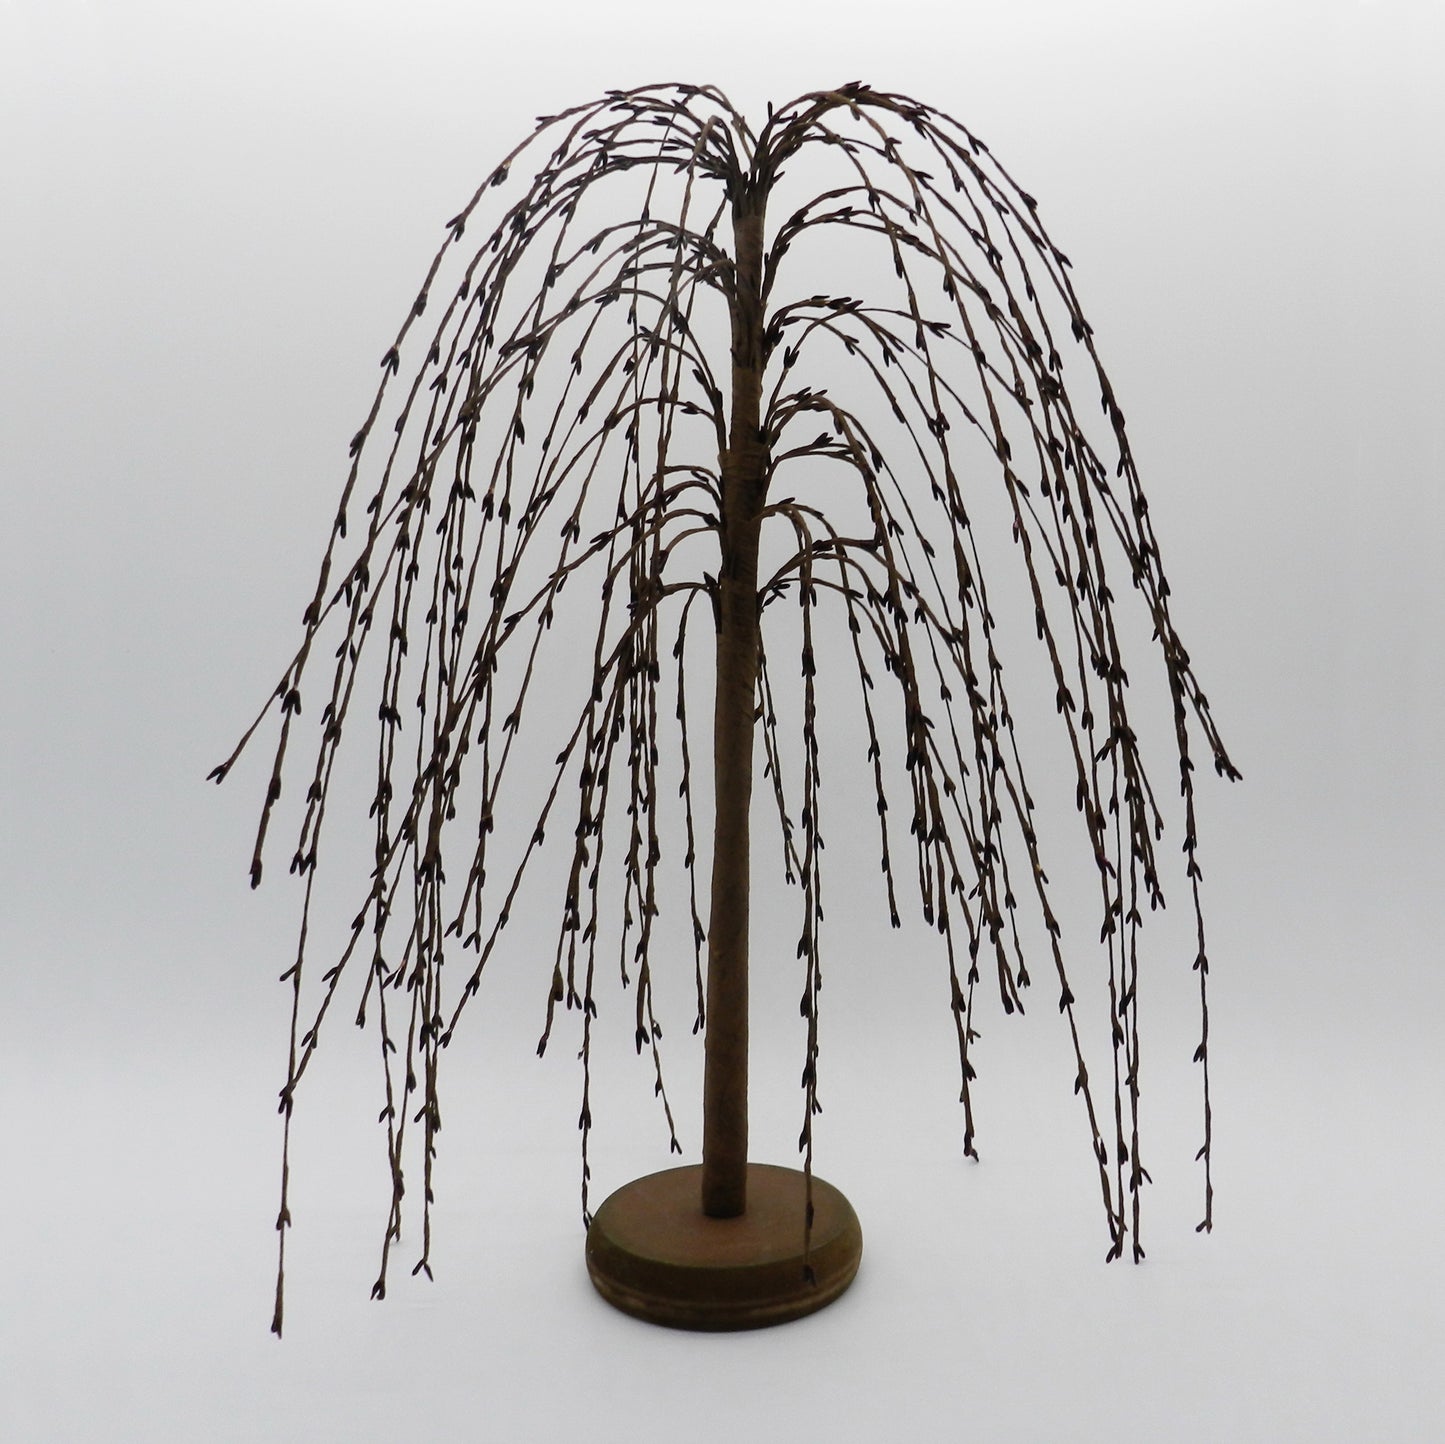 CVHOMEDECO. Burgundy Pip Berry Weeping Willow Tree Primitive Vintage Decoration Art, 18 Inch